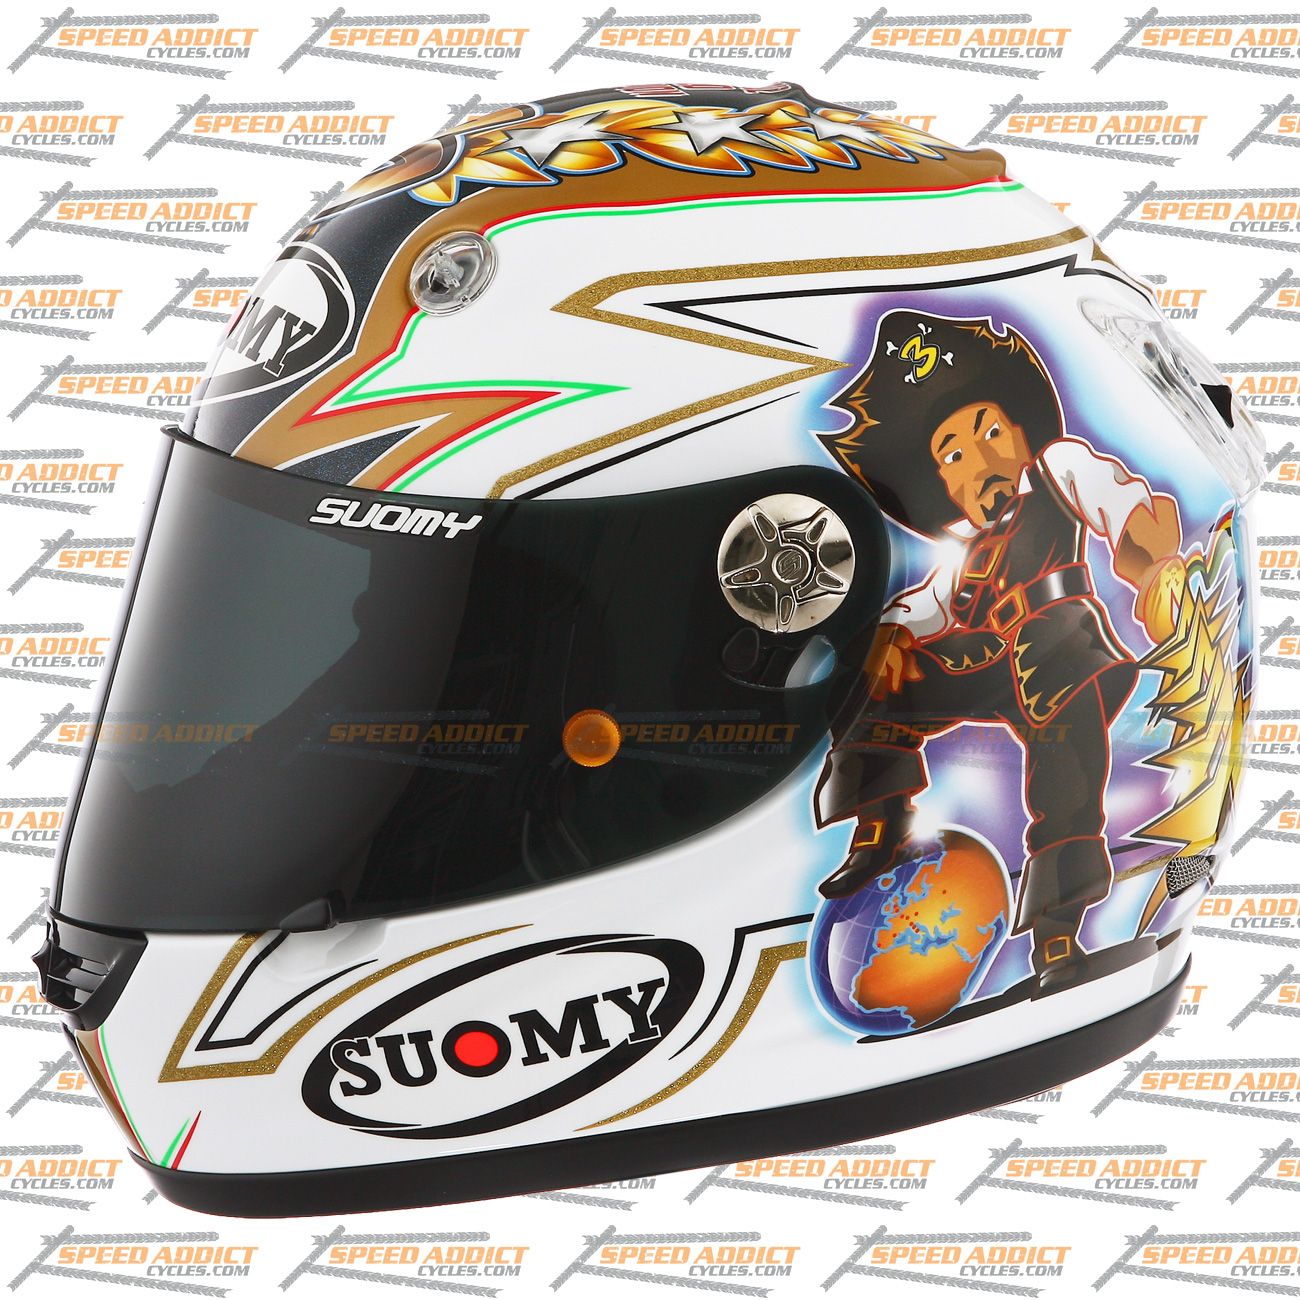 Suomy Vandal Max BIAGGI Limited Full Face Motorcycle Helmet 2X Large 